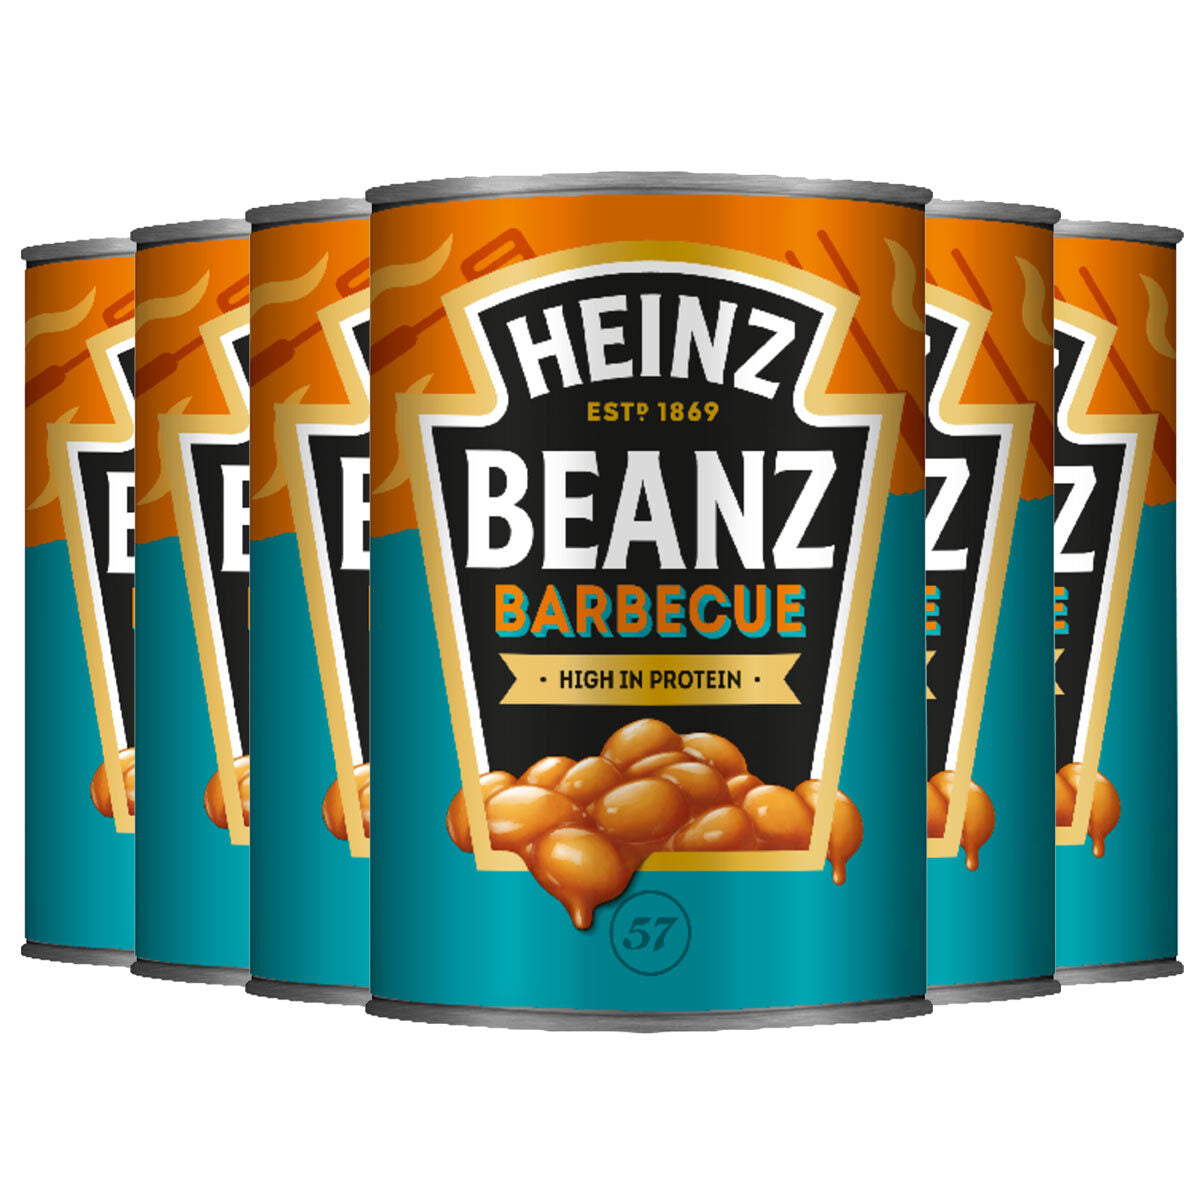 Heinz Baked Beans Barbecue, 6 x 390g - McGrocer